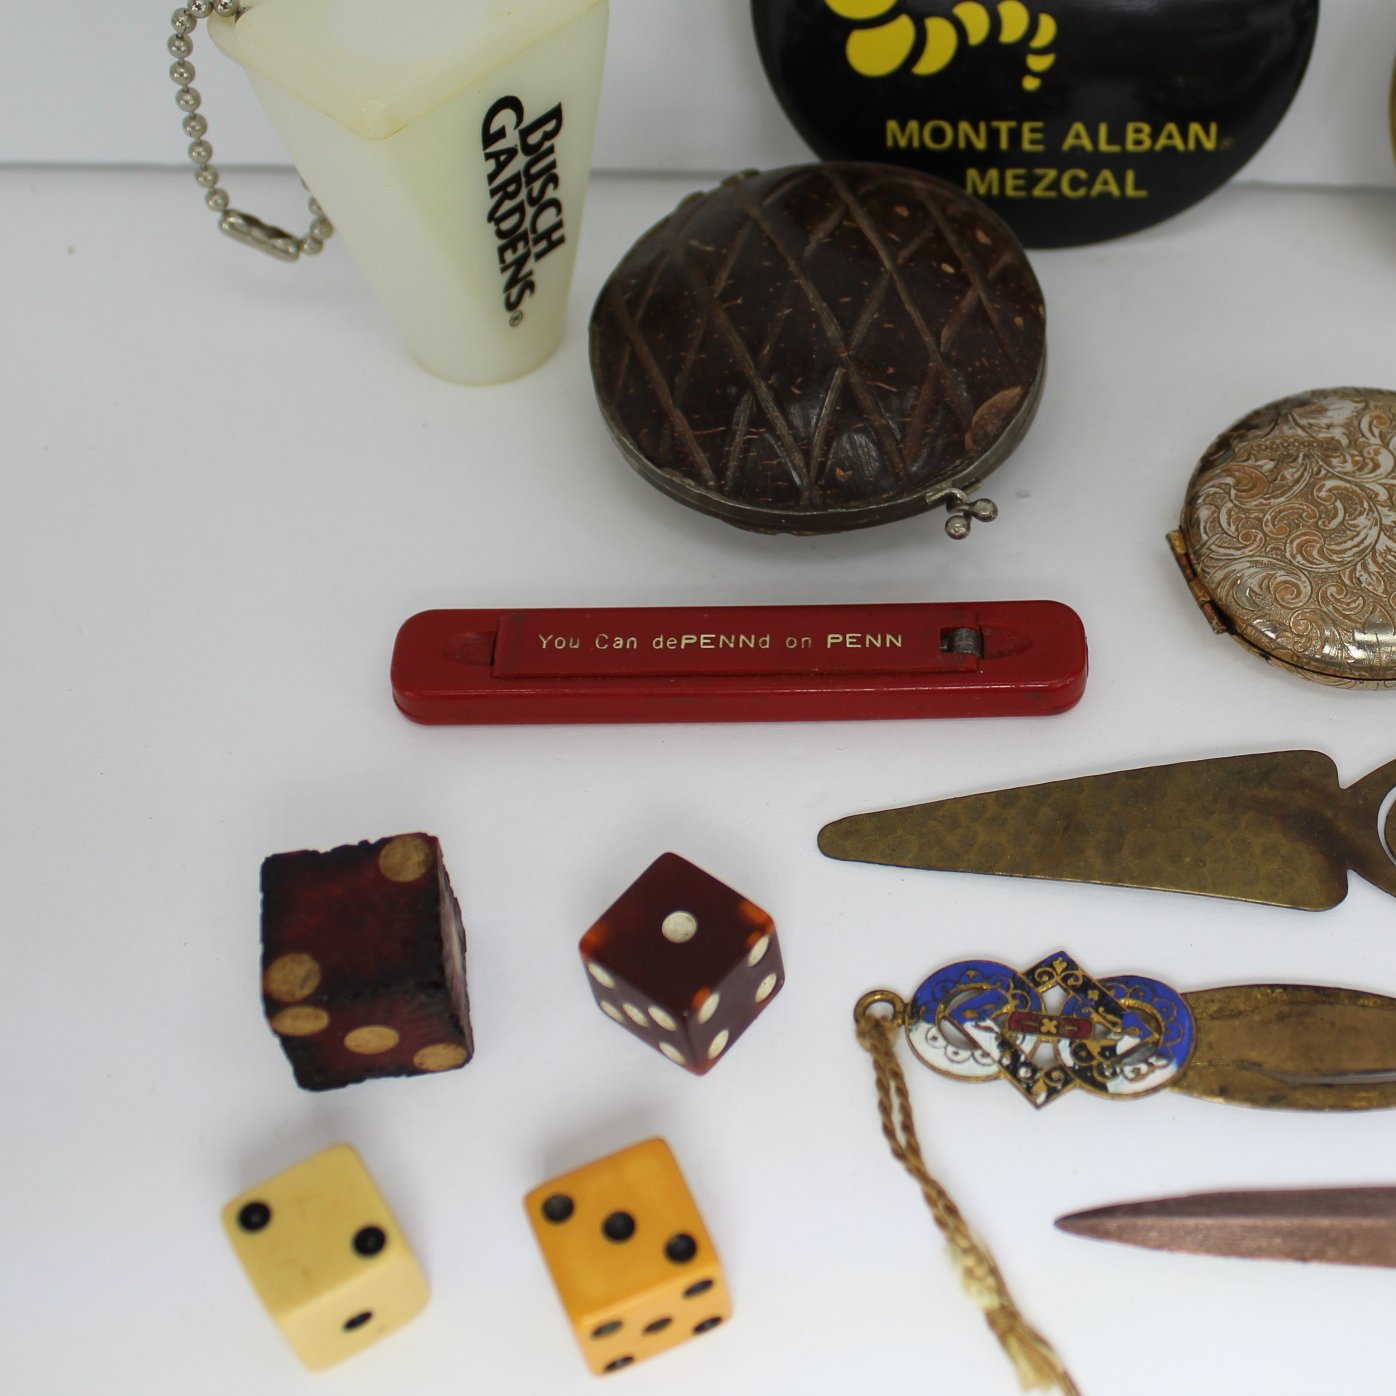 Estate Collection Old Stuff Dice Trinket Boxes Tin Busch Gdns '39 World's Fair DOJ Svc Pin slide out pocket knife